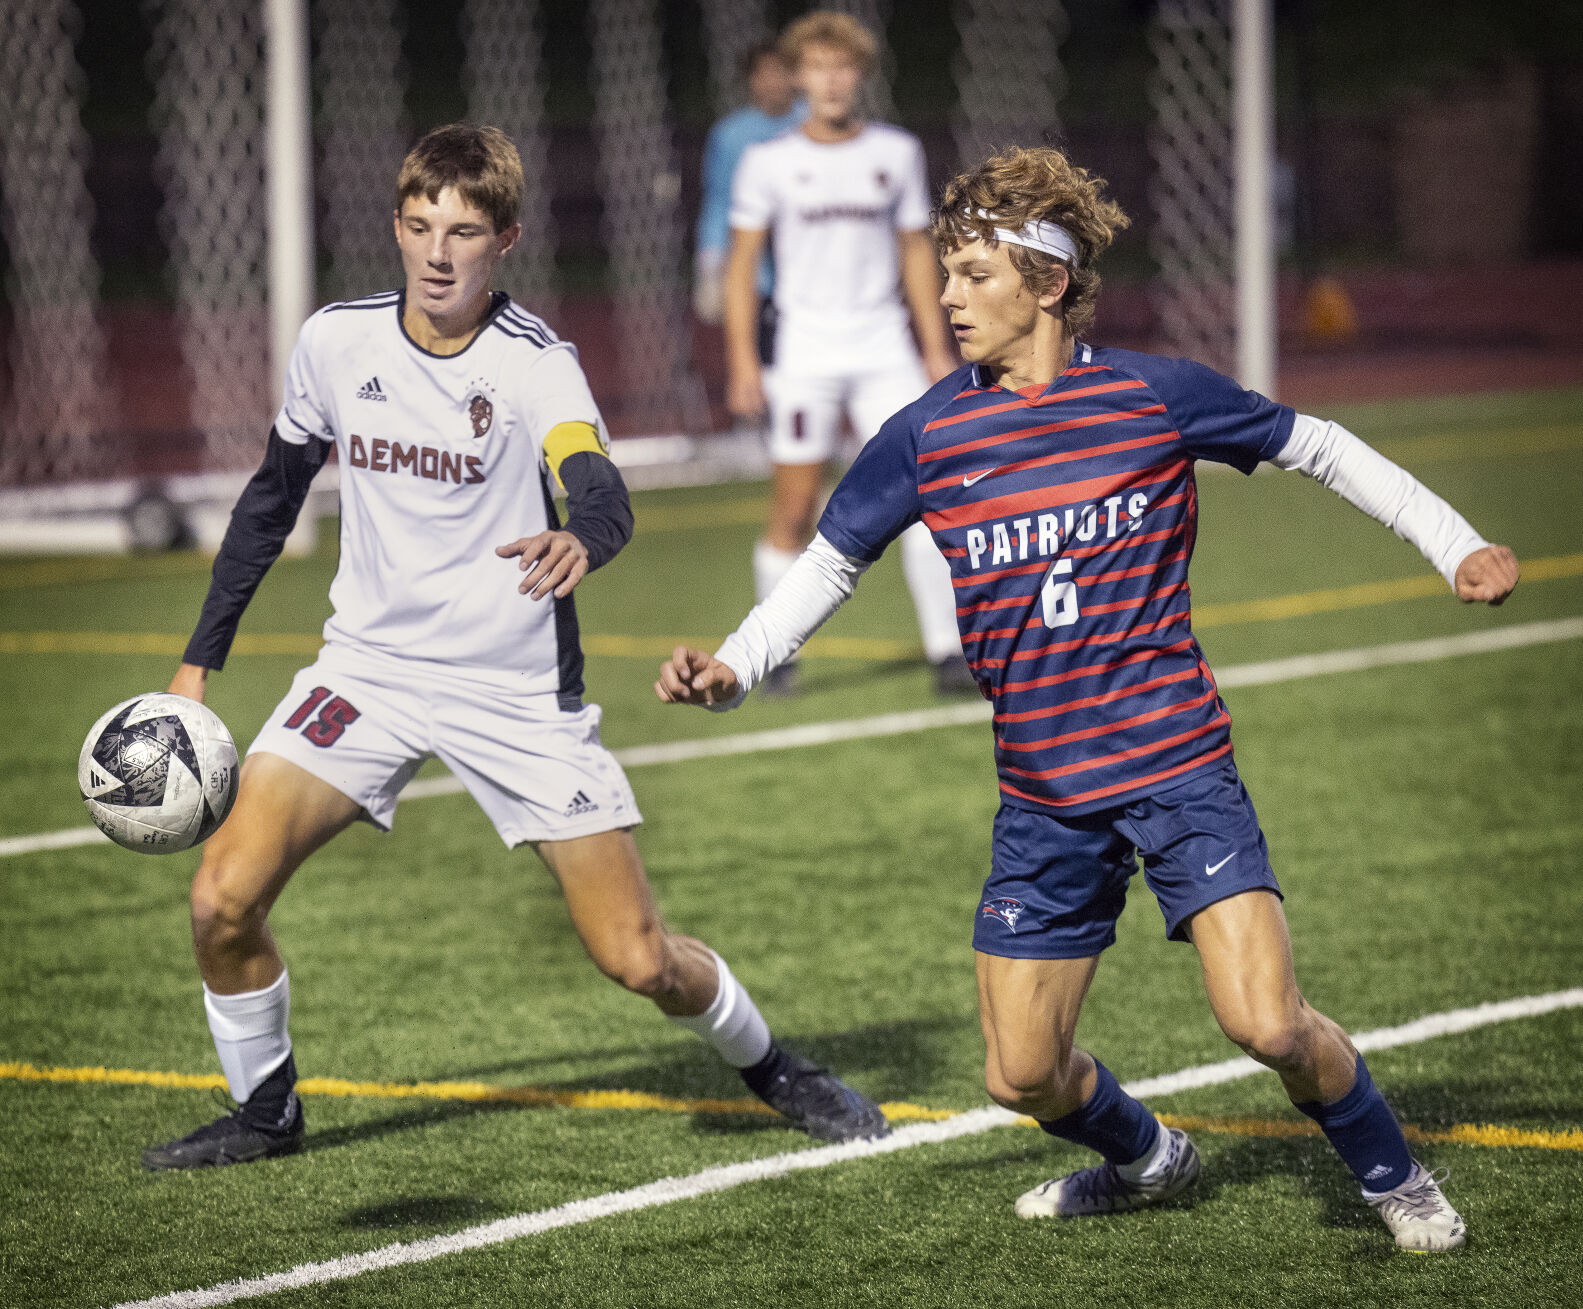 Bismarck Demons Secure Exciting 1-0 Victory over Century Patriots in High School Soccer Battle